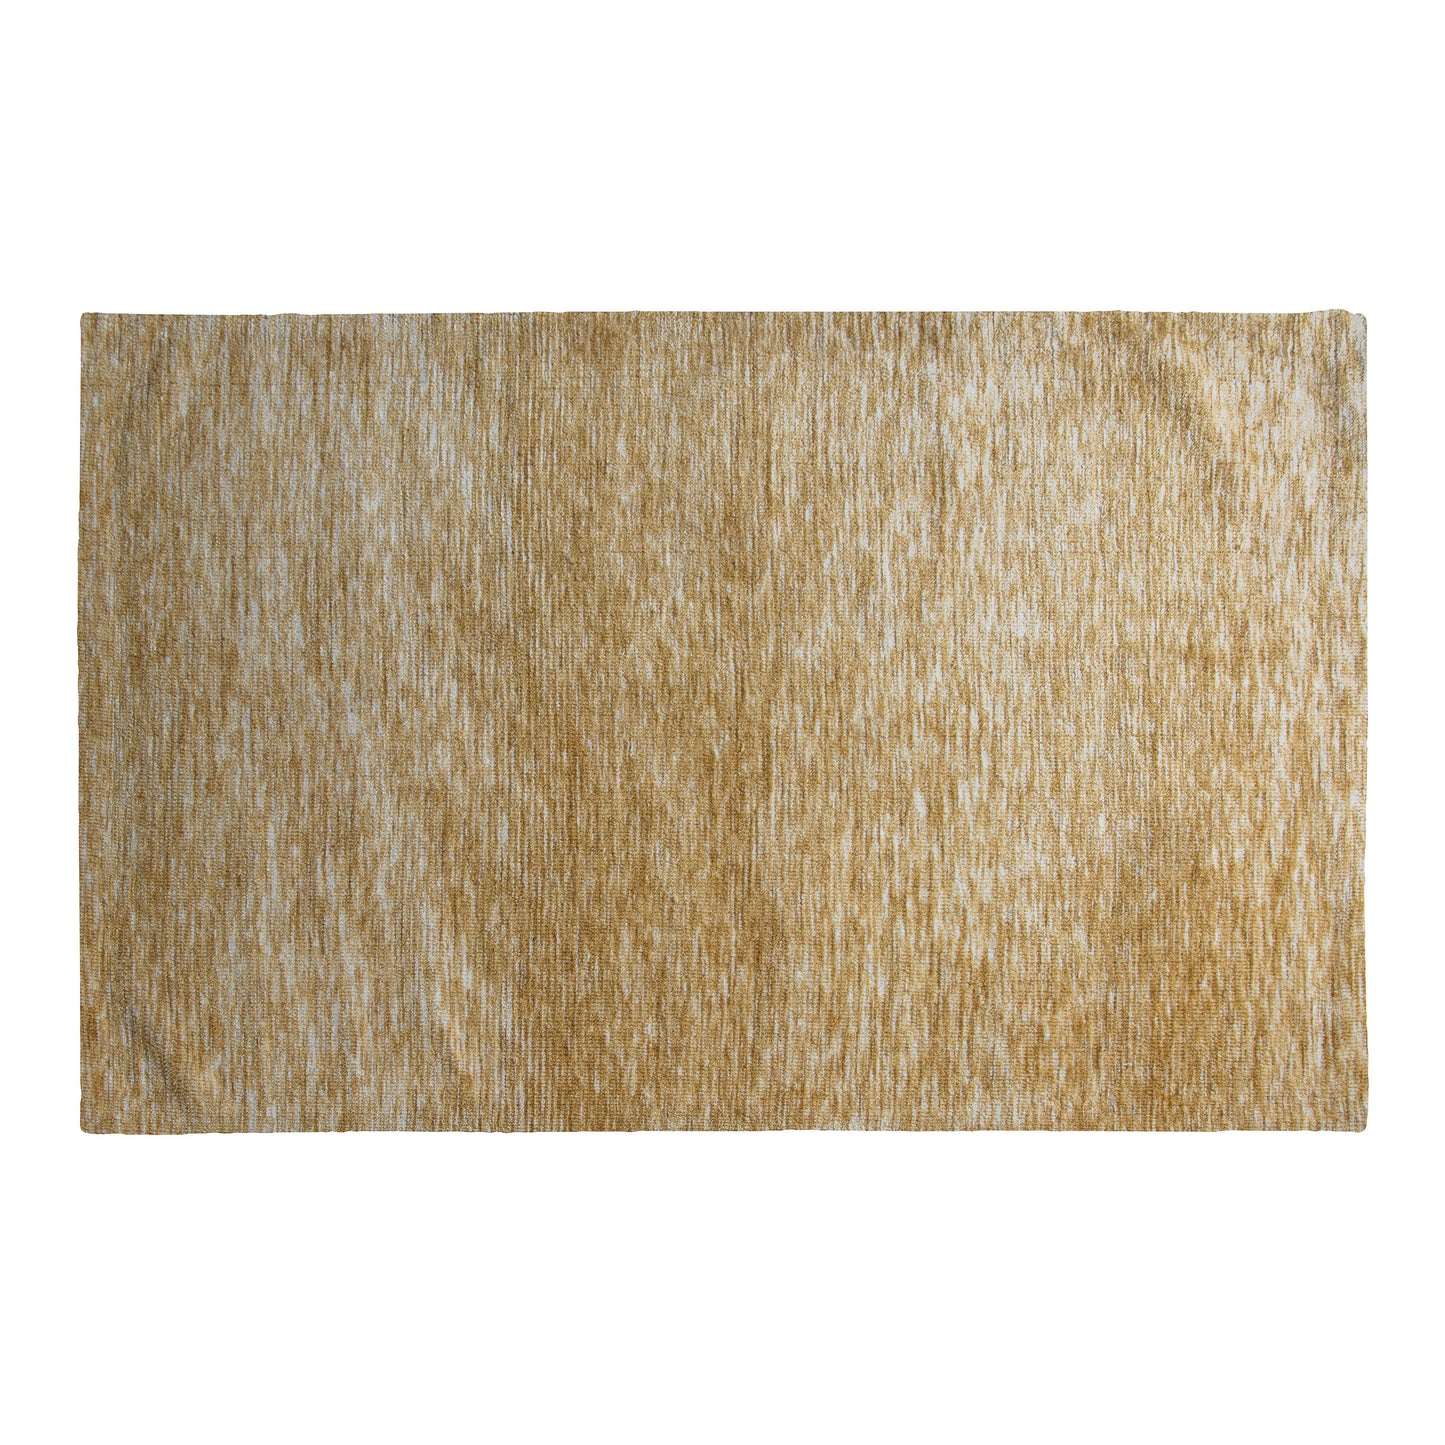 Load image into Gallery viewer, A textured Walter Rug Ochre 800x1500mm for interior decor from Kikiathome.co.uk.
